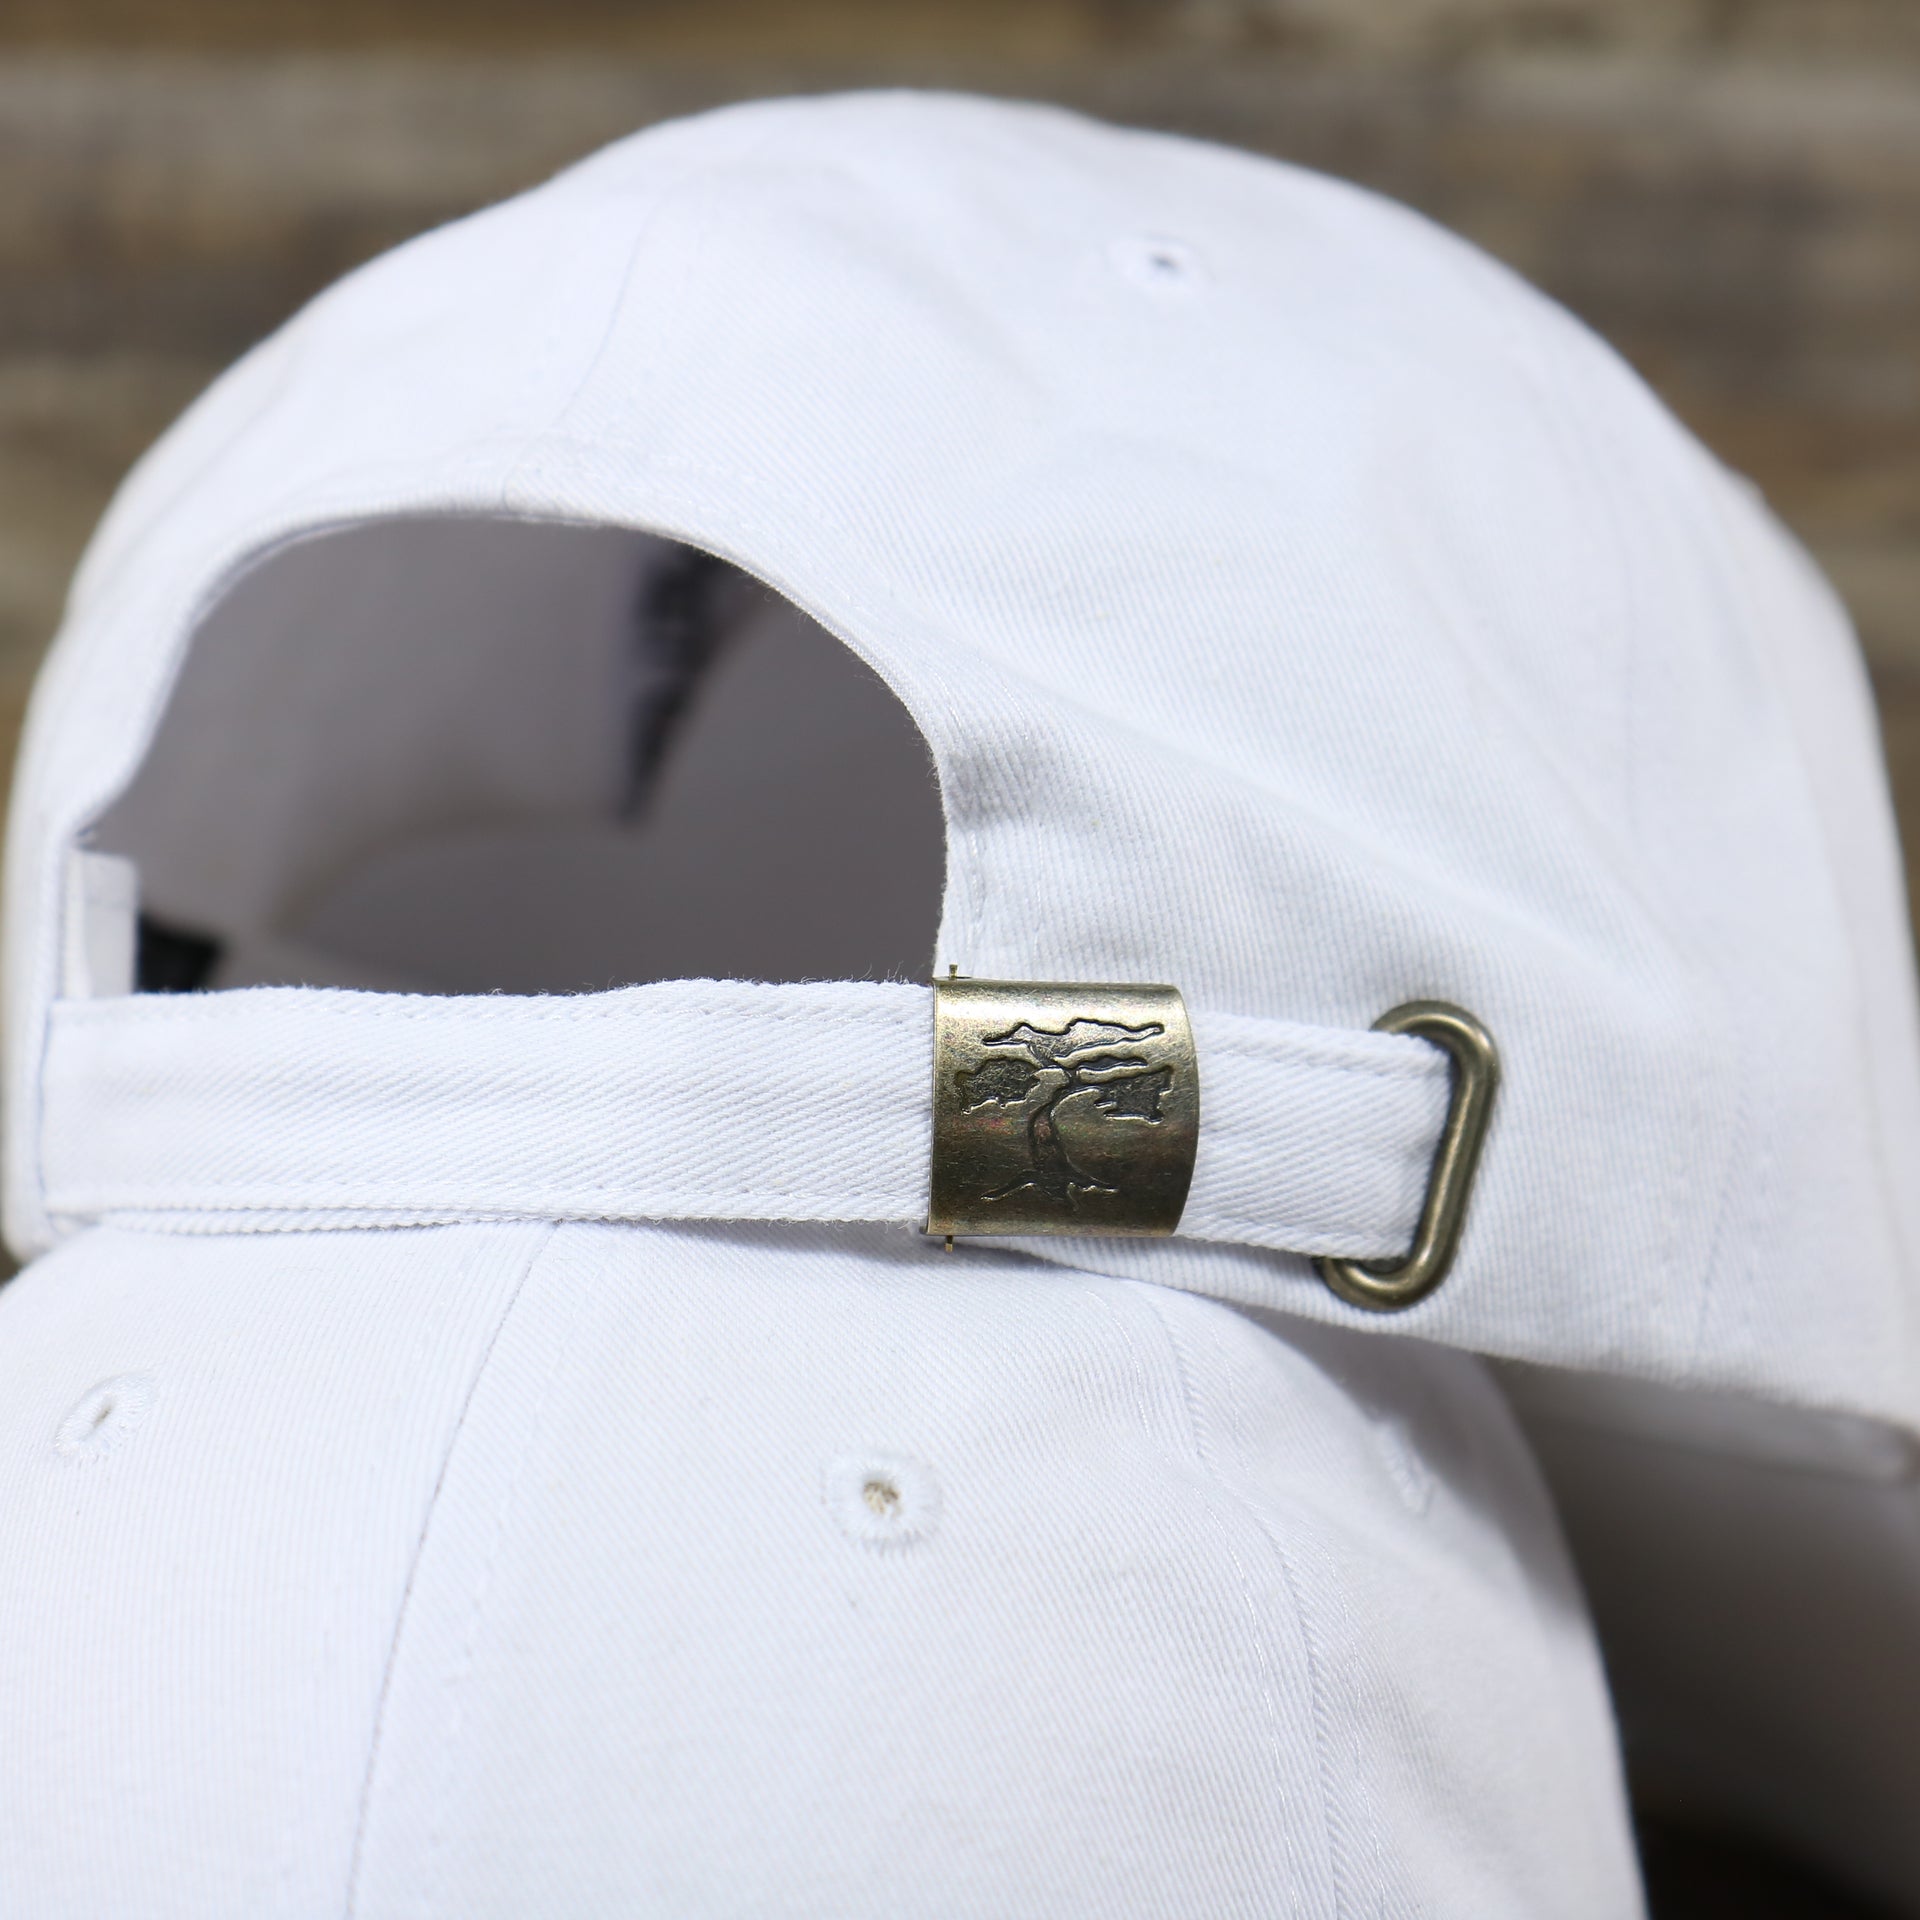 The White Adjustable Strap With Bonsai Tree Engraved Buckle on the Snow White Blank Baseball Hat | White Dad Hat